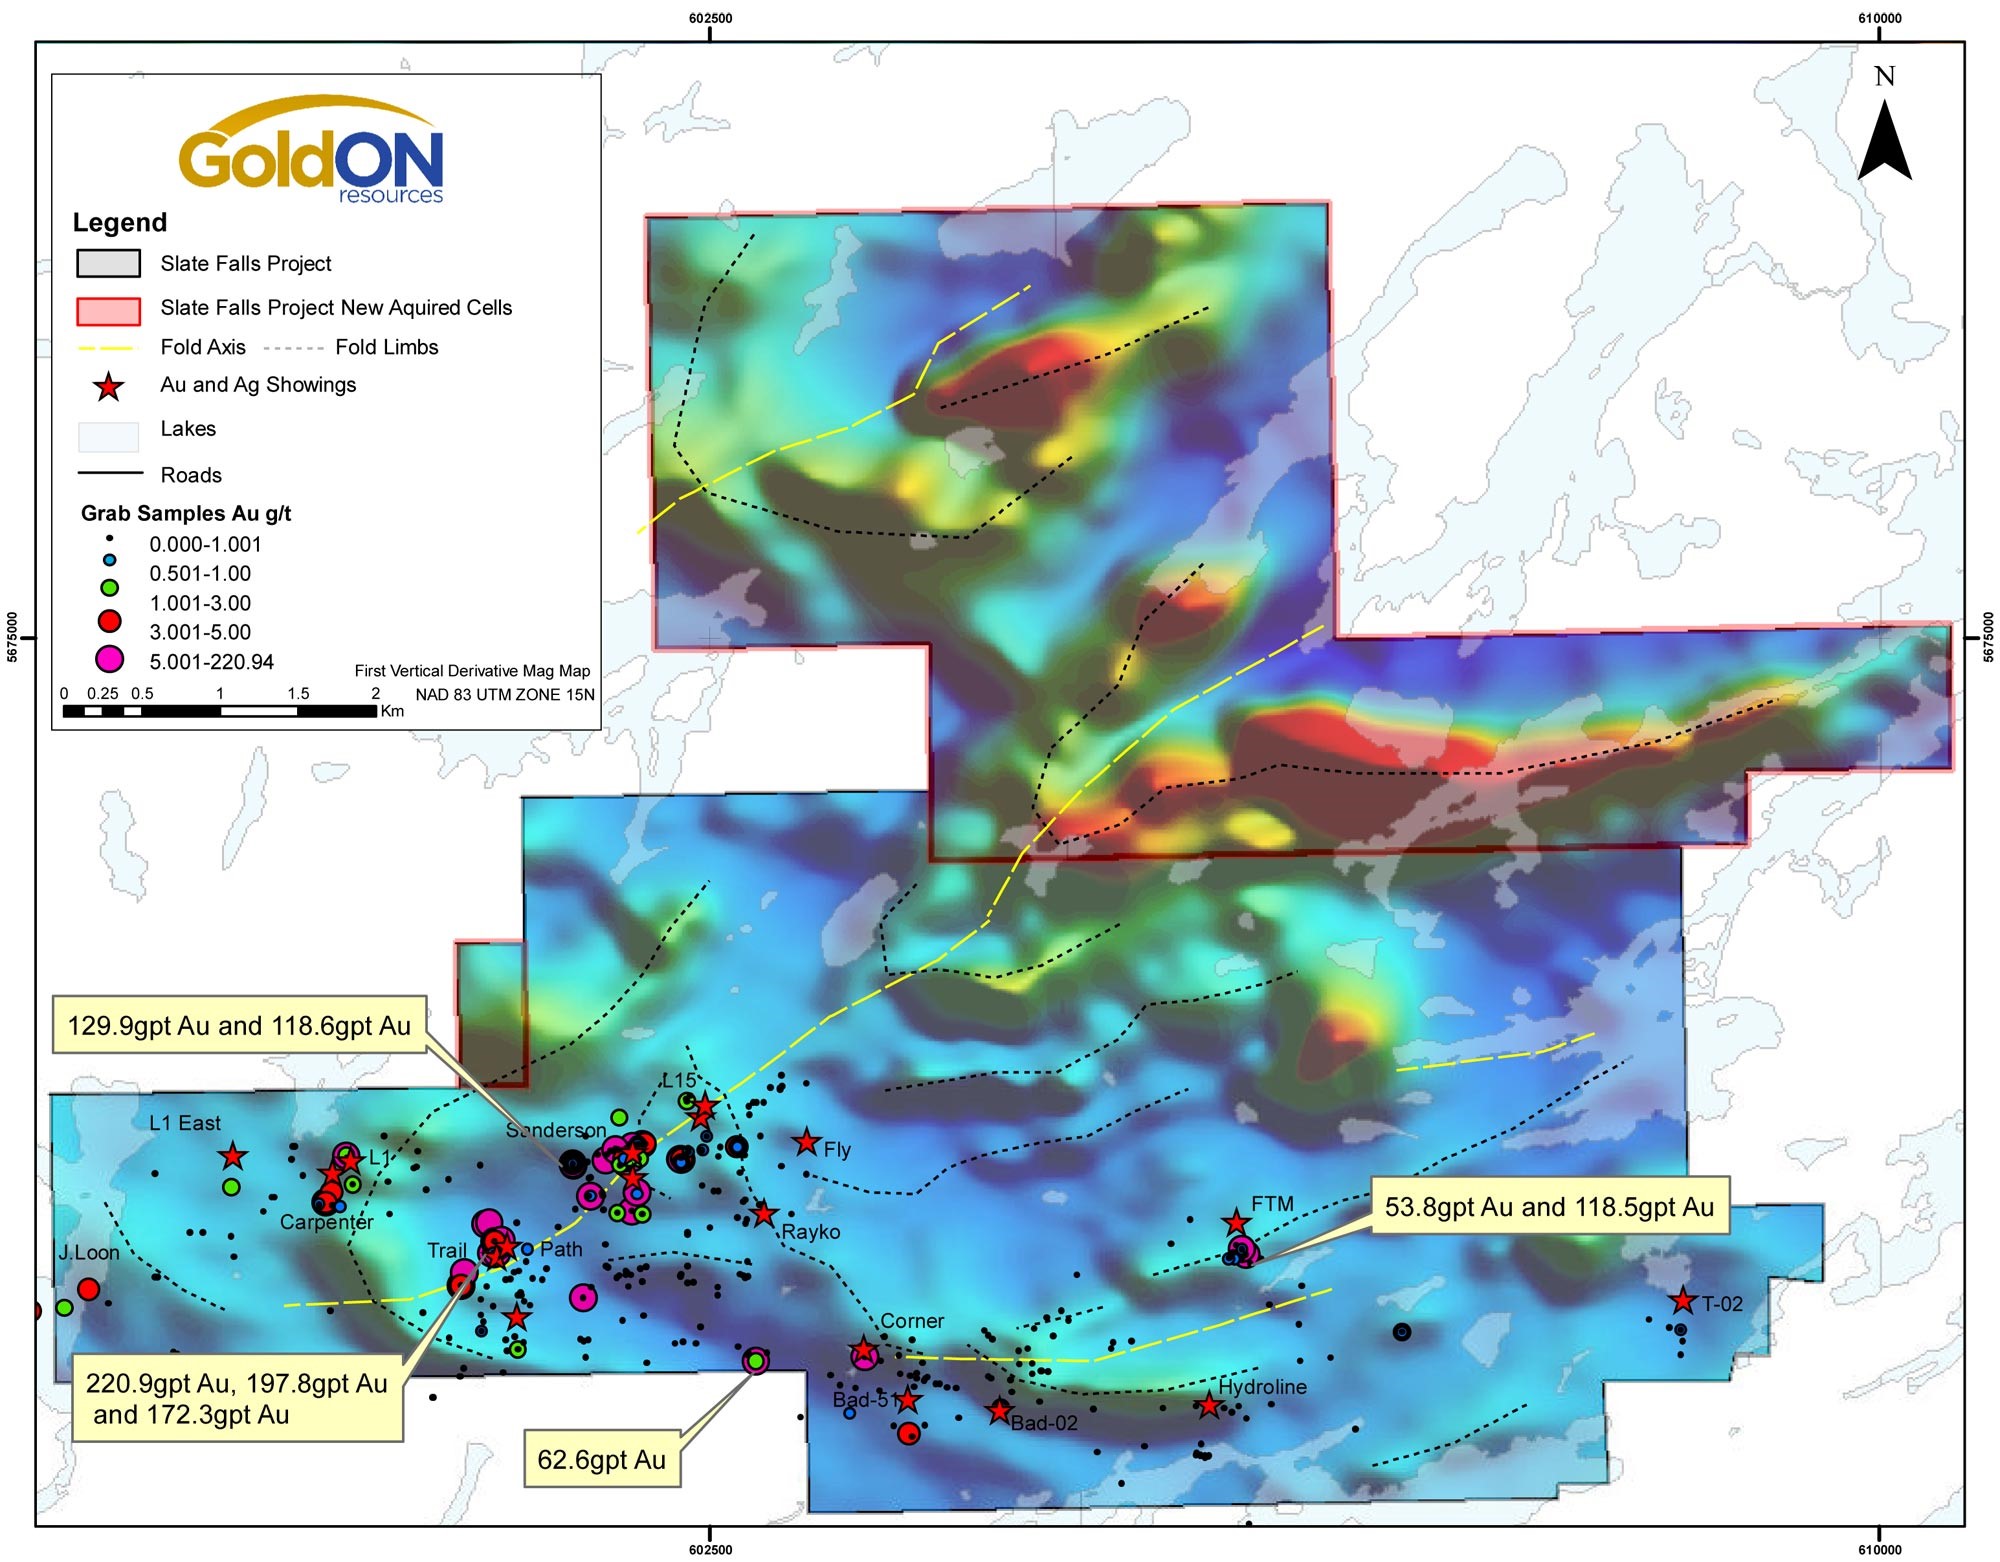 GoldON Resources Ltd., Tuesday, November 12, 2019, Press release picture